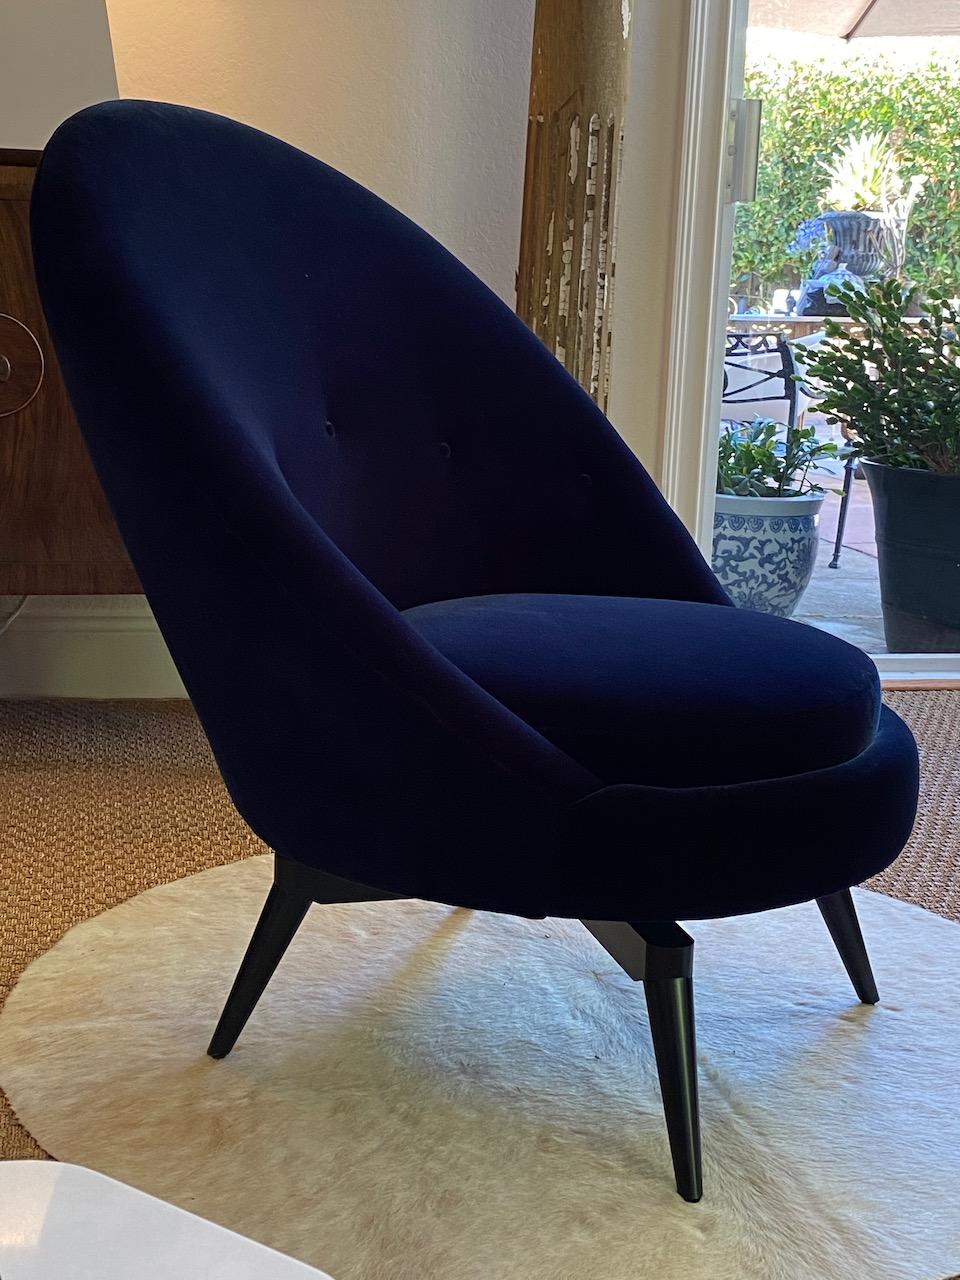 American Pair of Swivel Chairs in Navy Blue Velvet by Adm Bespoke For Sale